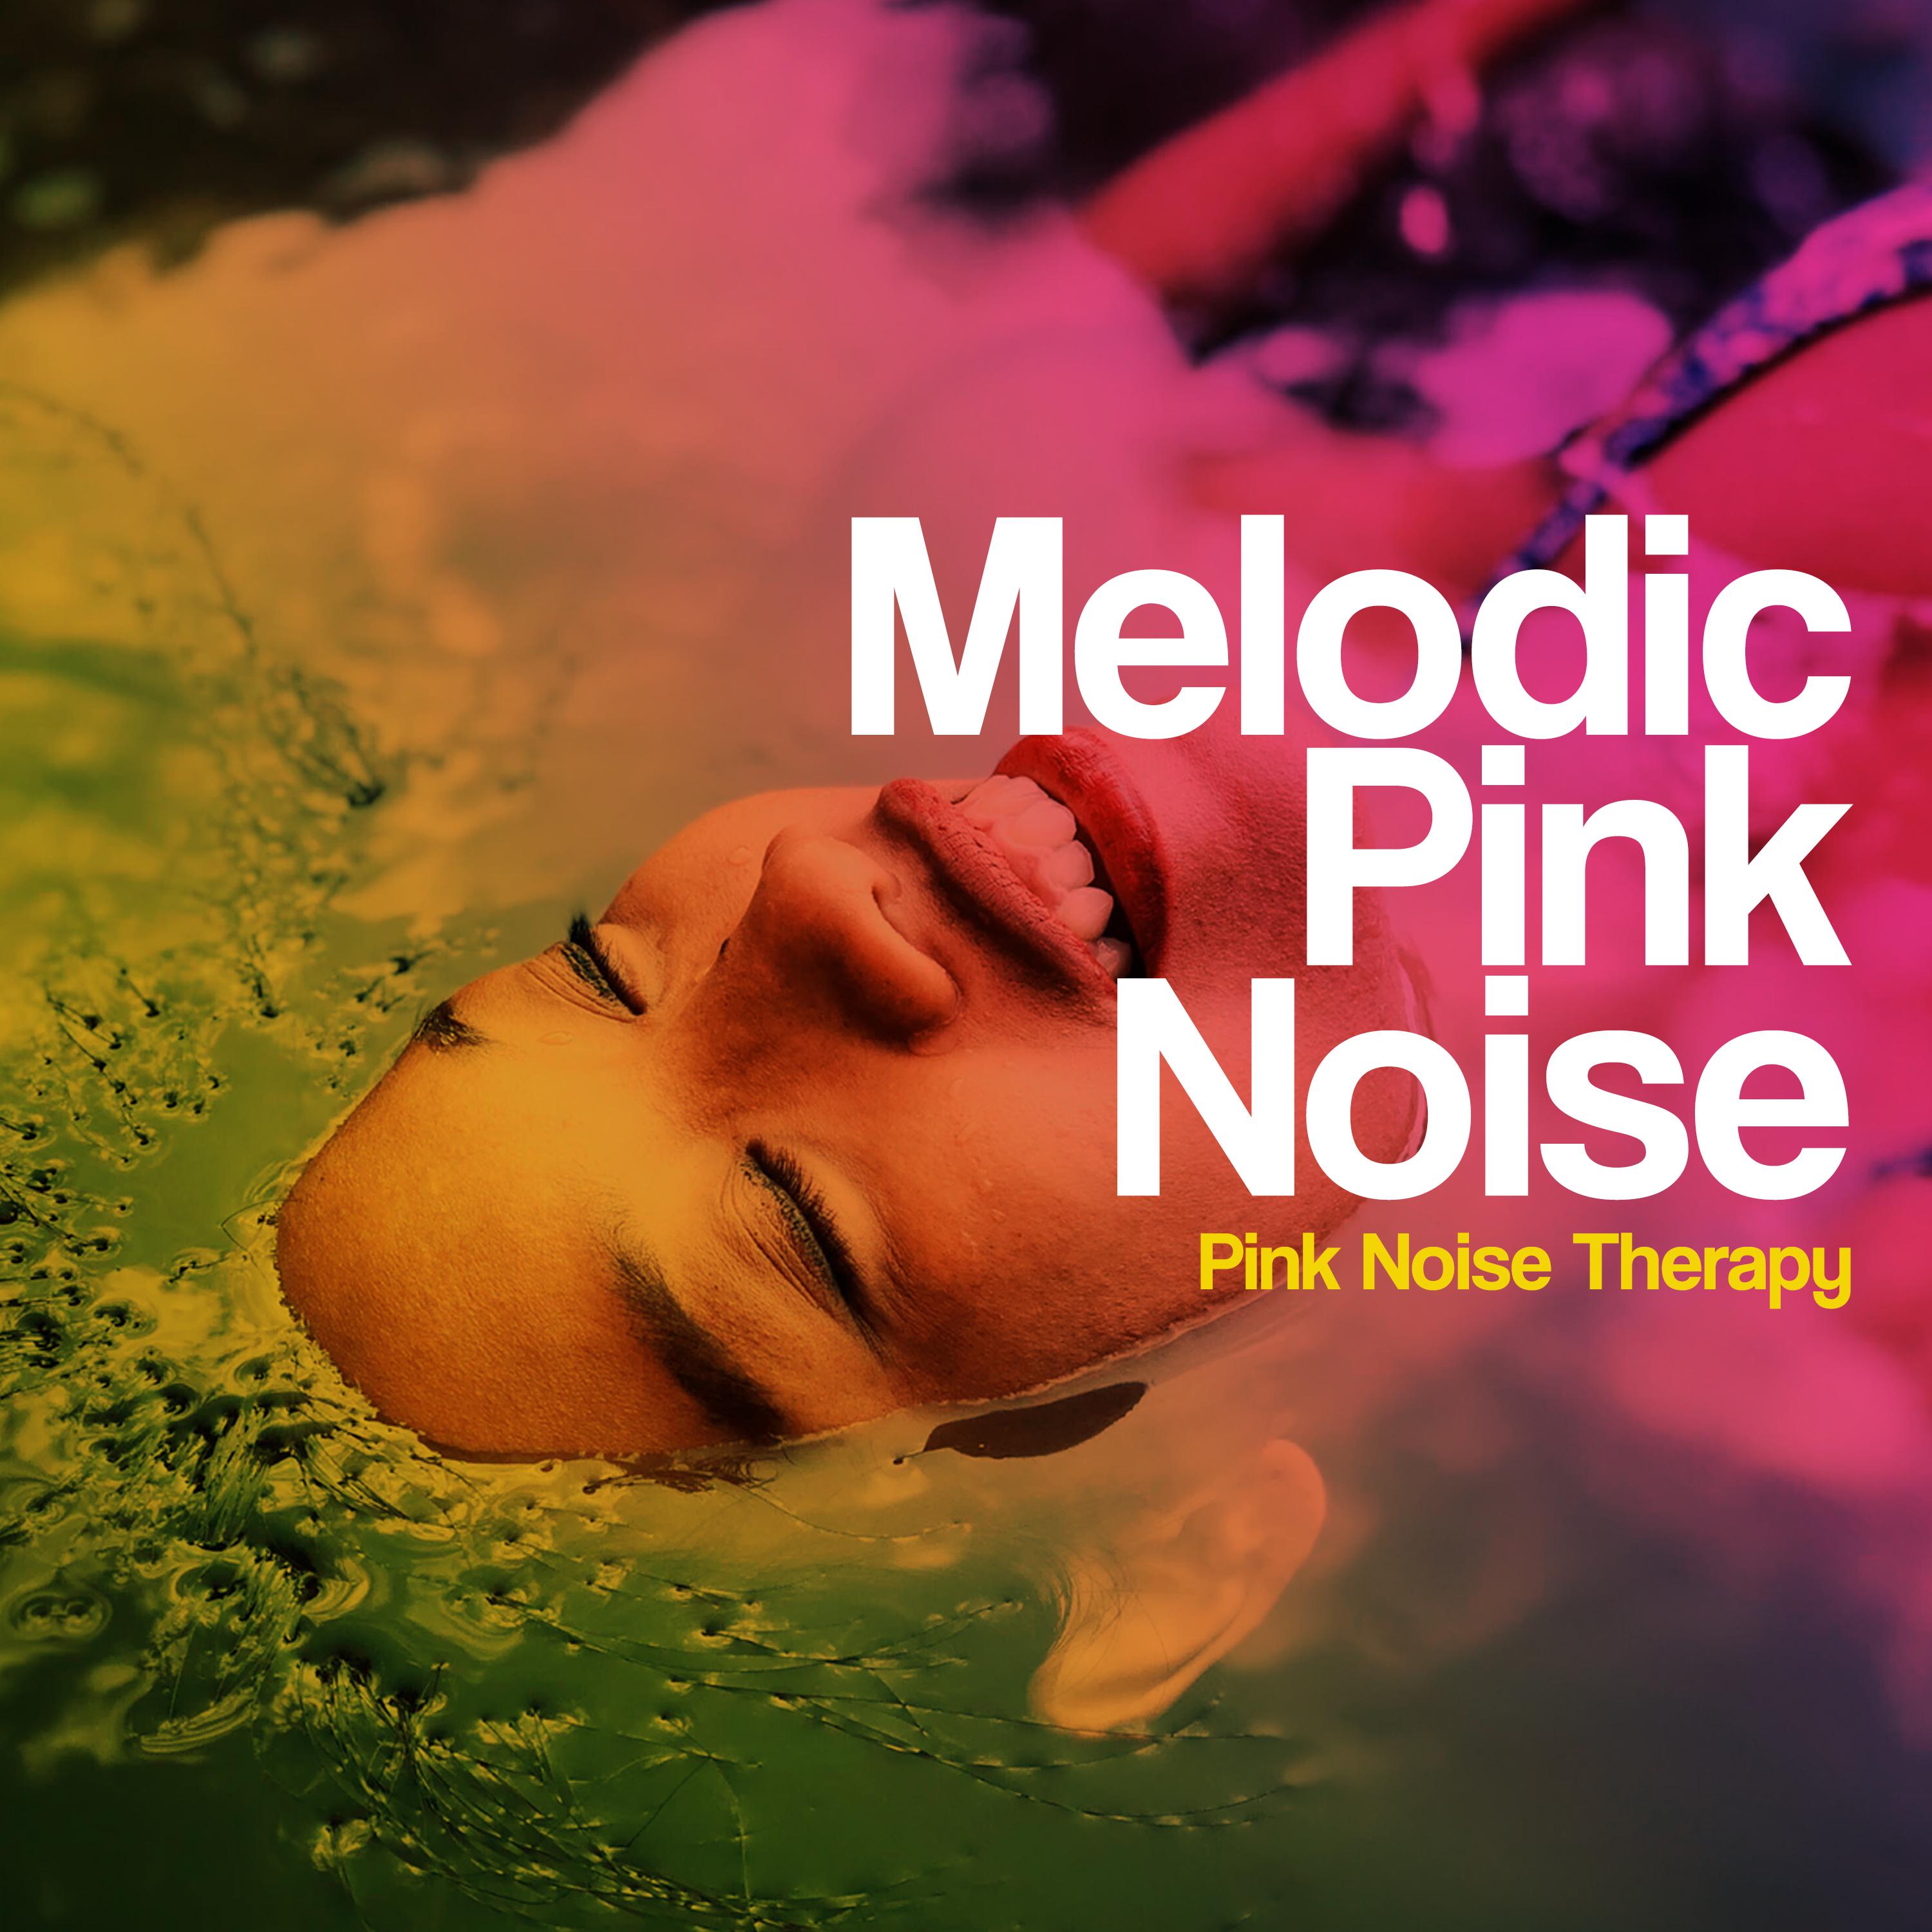 Melodic Pink Noise